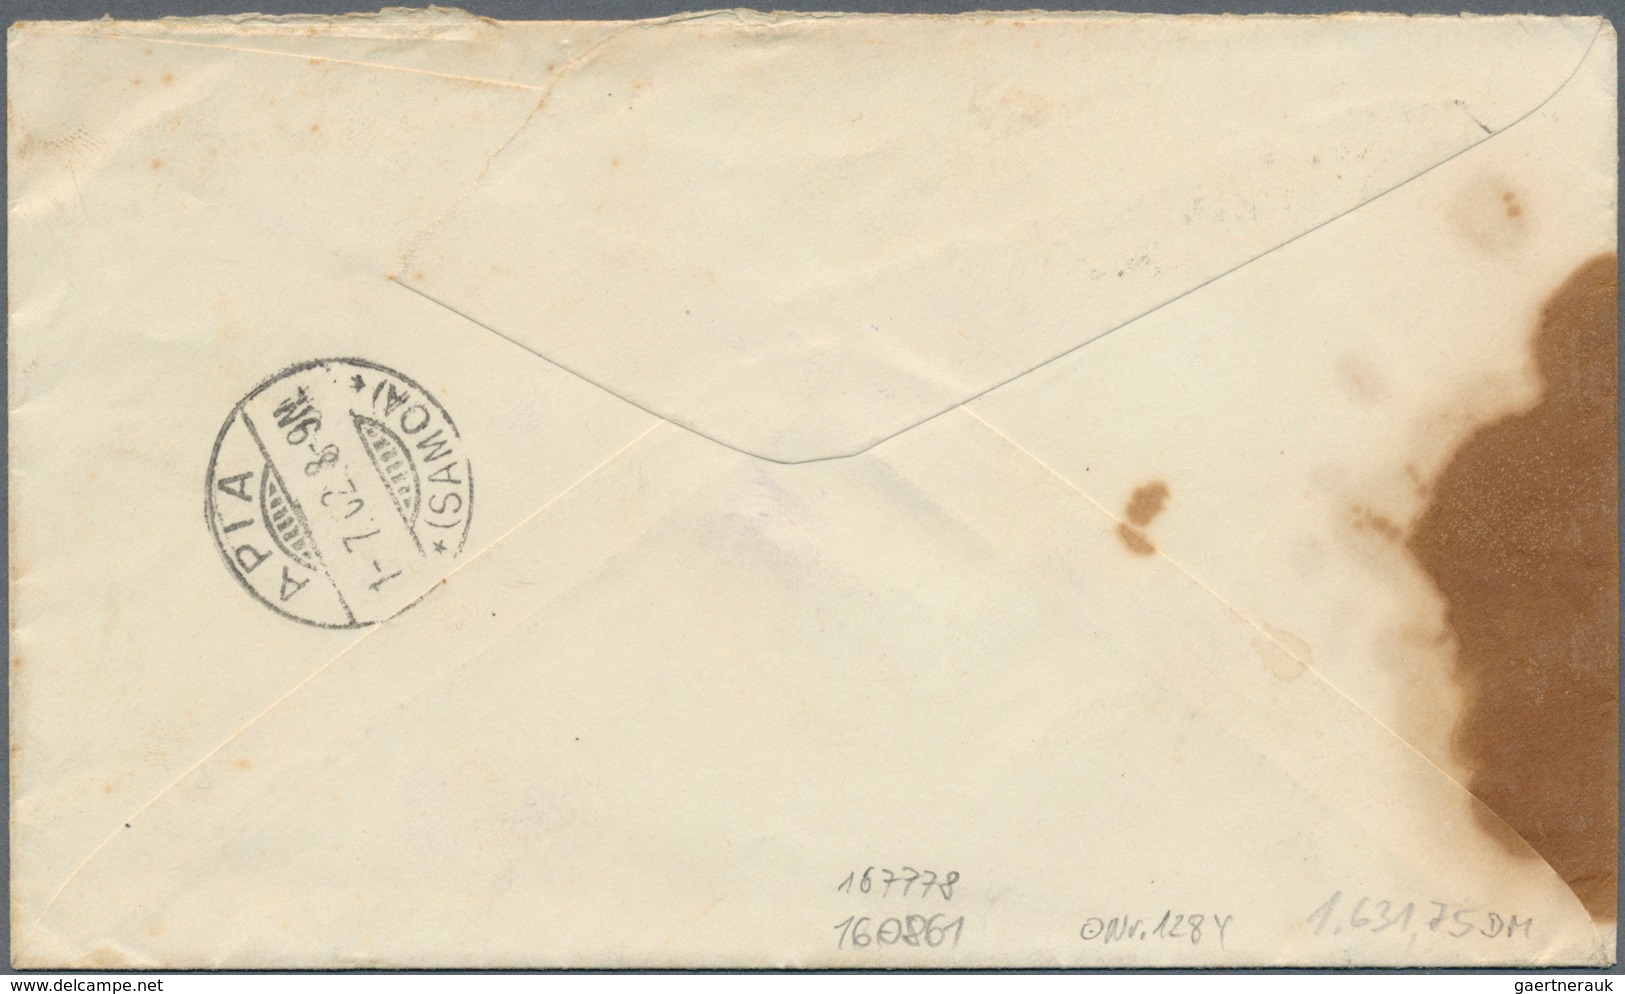 Samoa: 1902 Printed Cover From The "Navy Dept., U.S. Naval Station, TUTUILA' From Pago Pago To Apia - Samoa